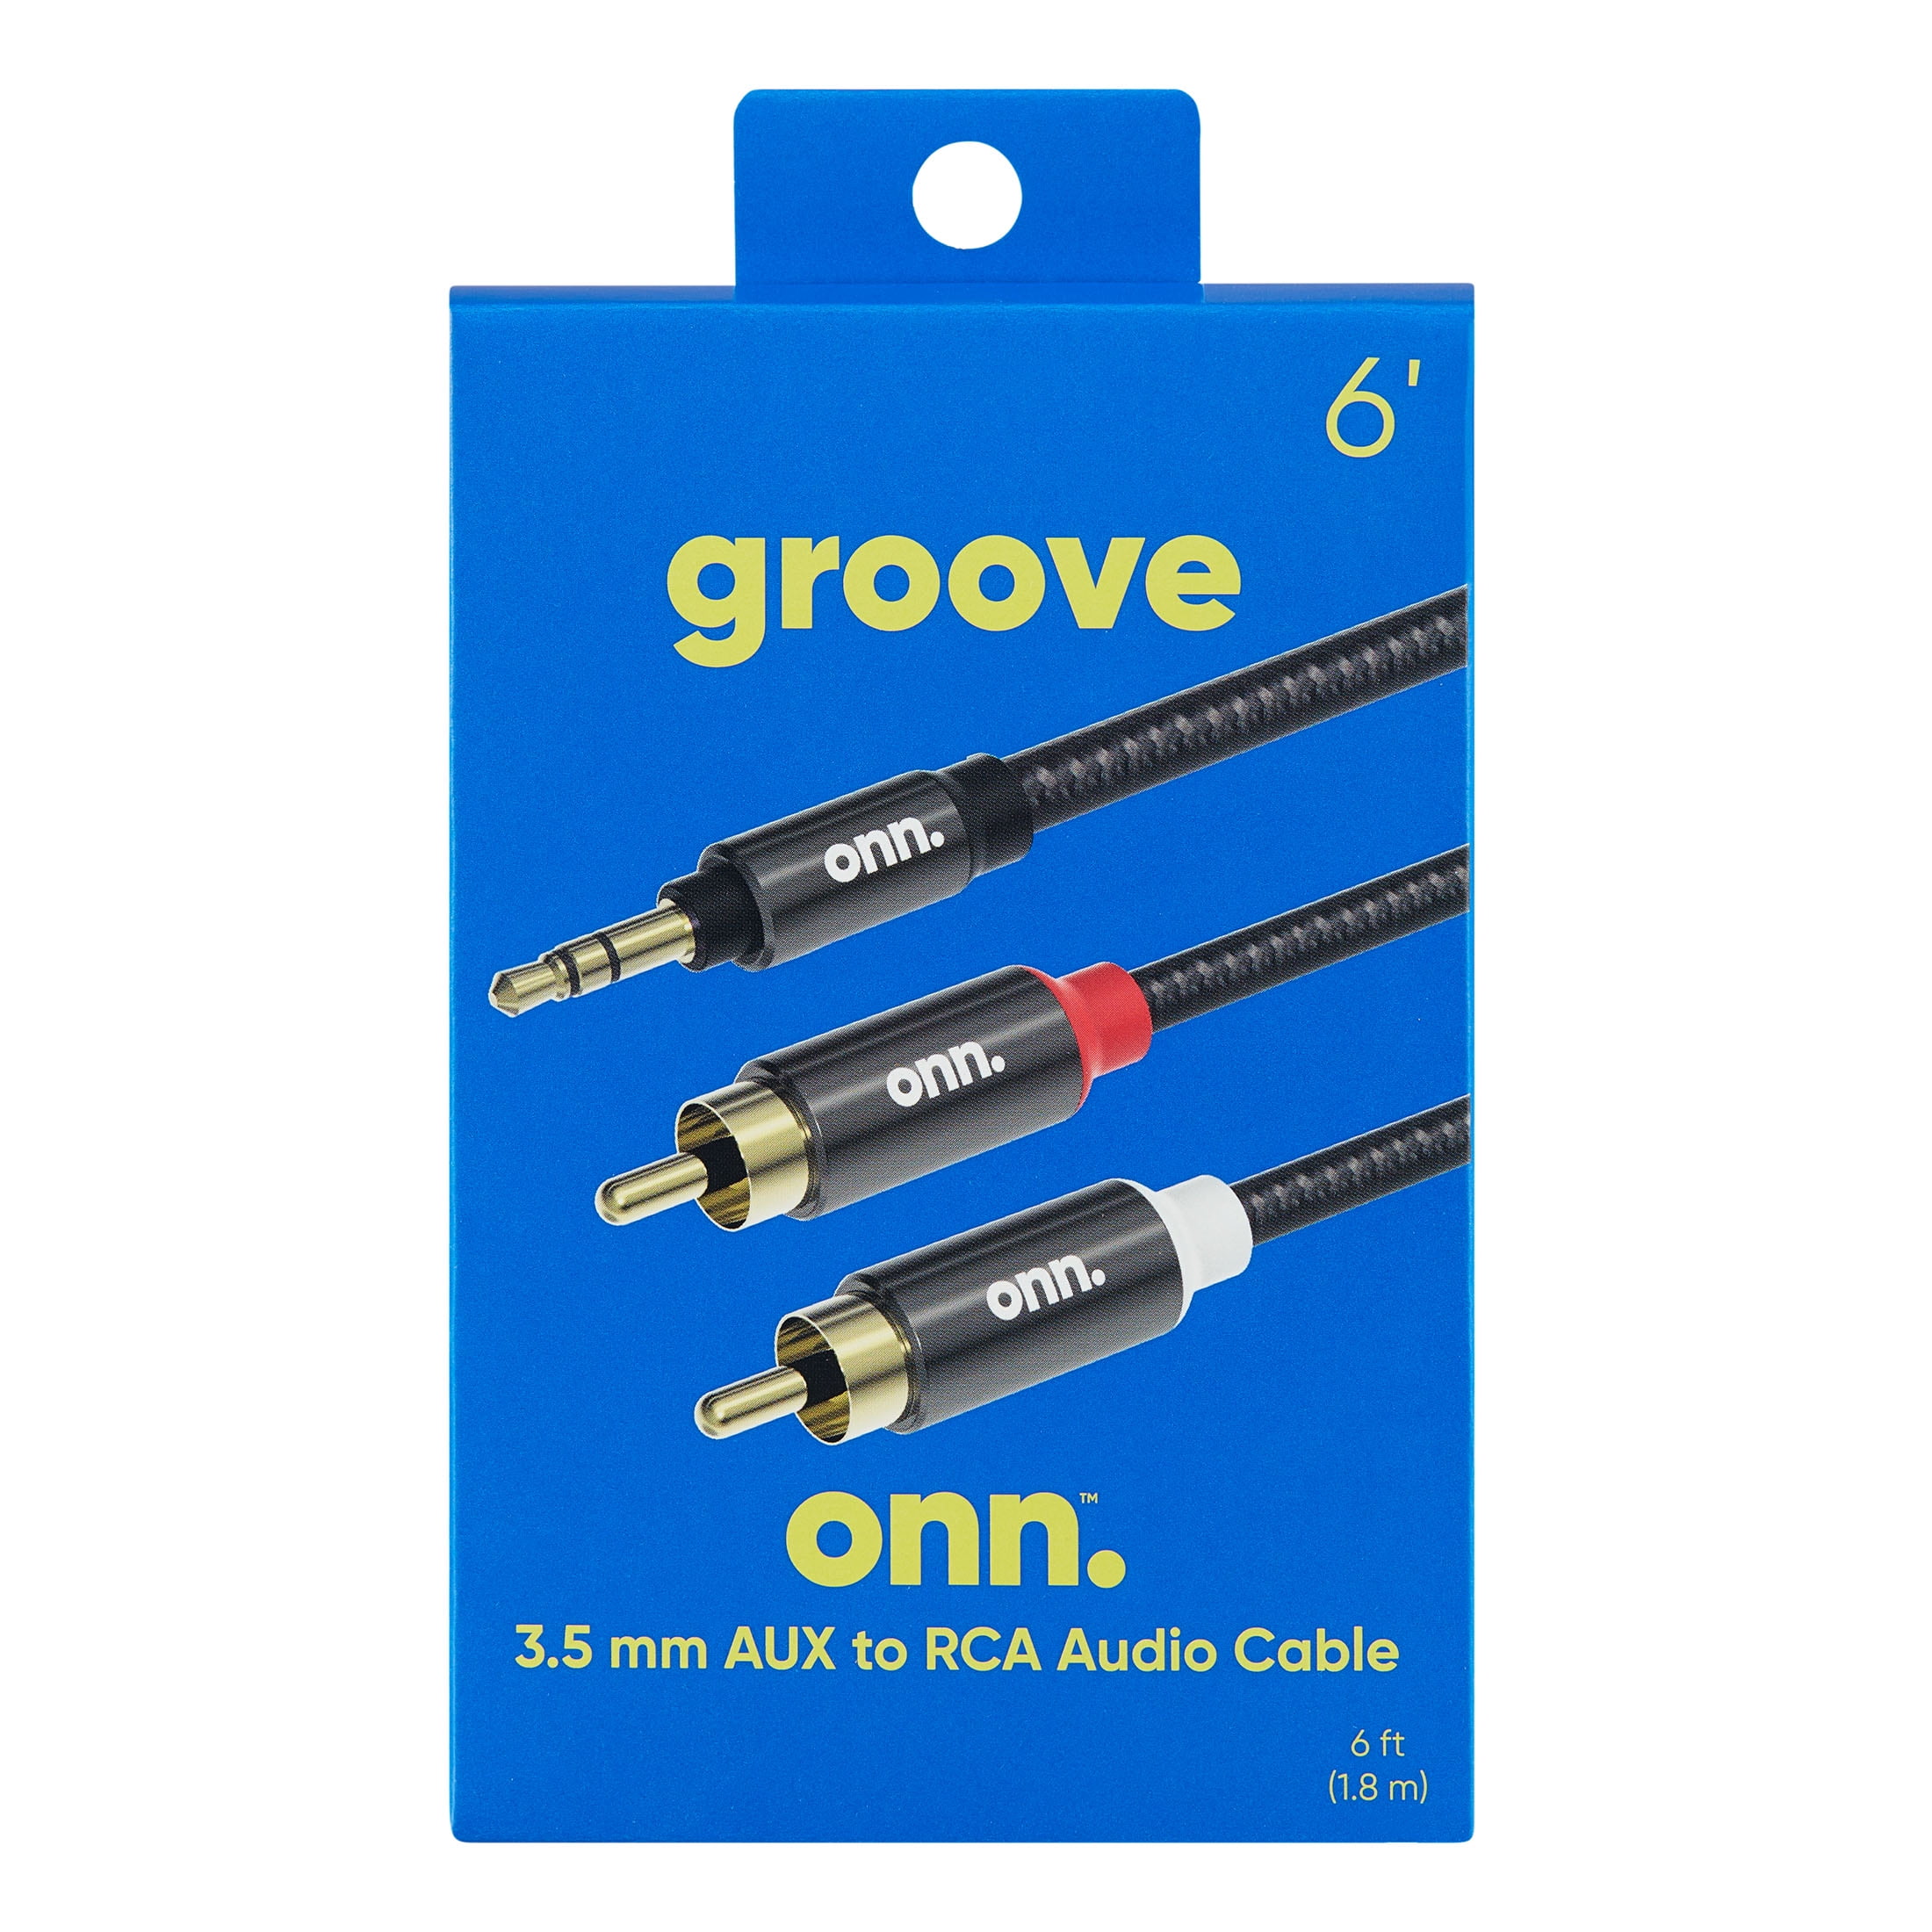 onn. 6' Stereo Audio Cable